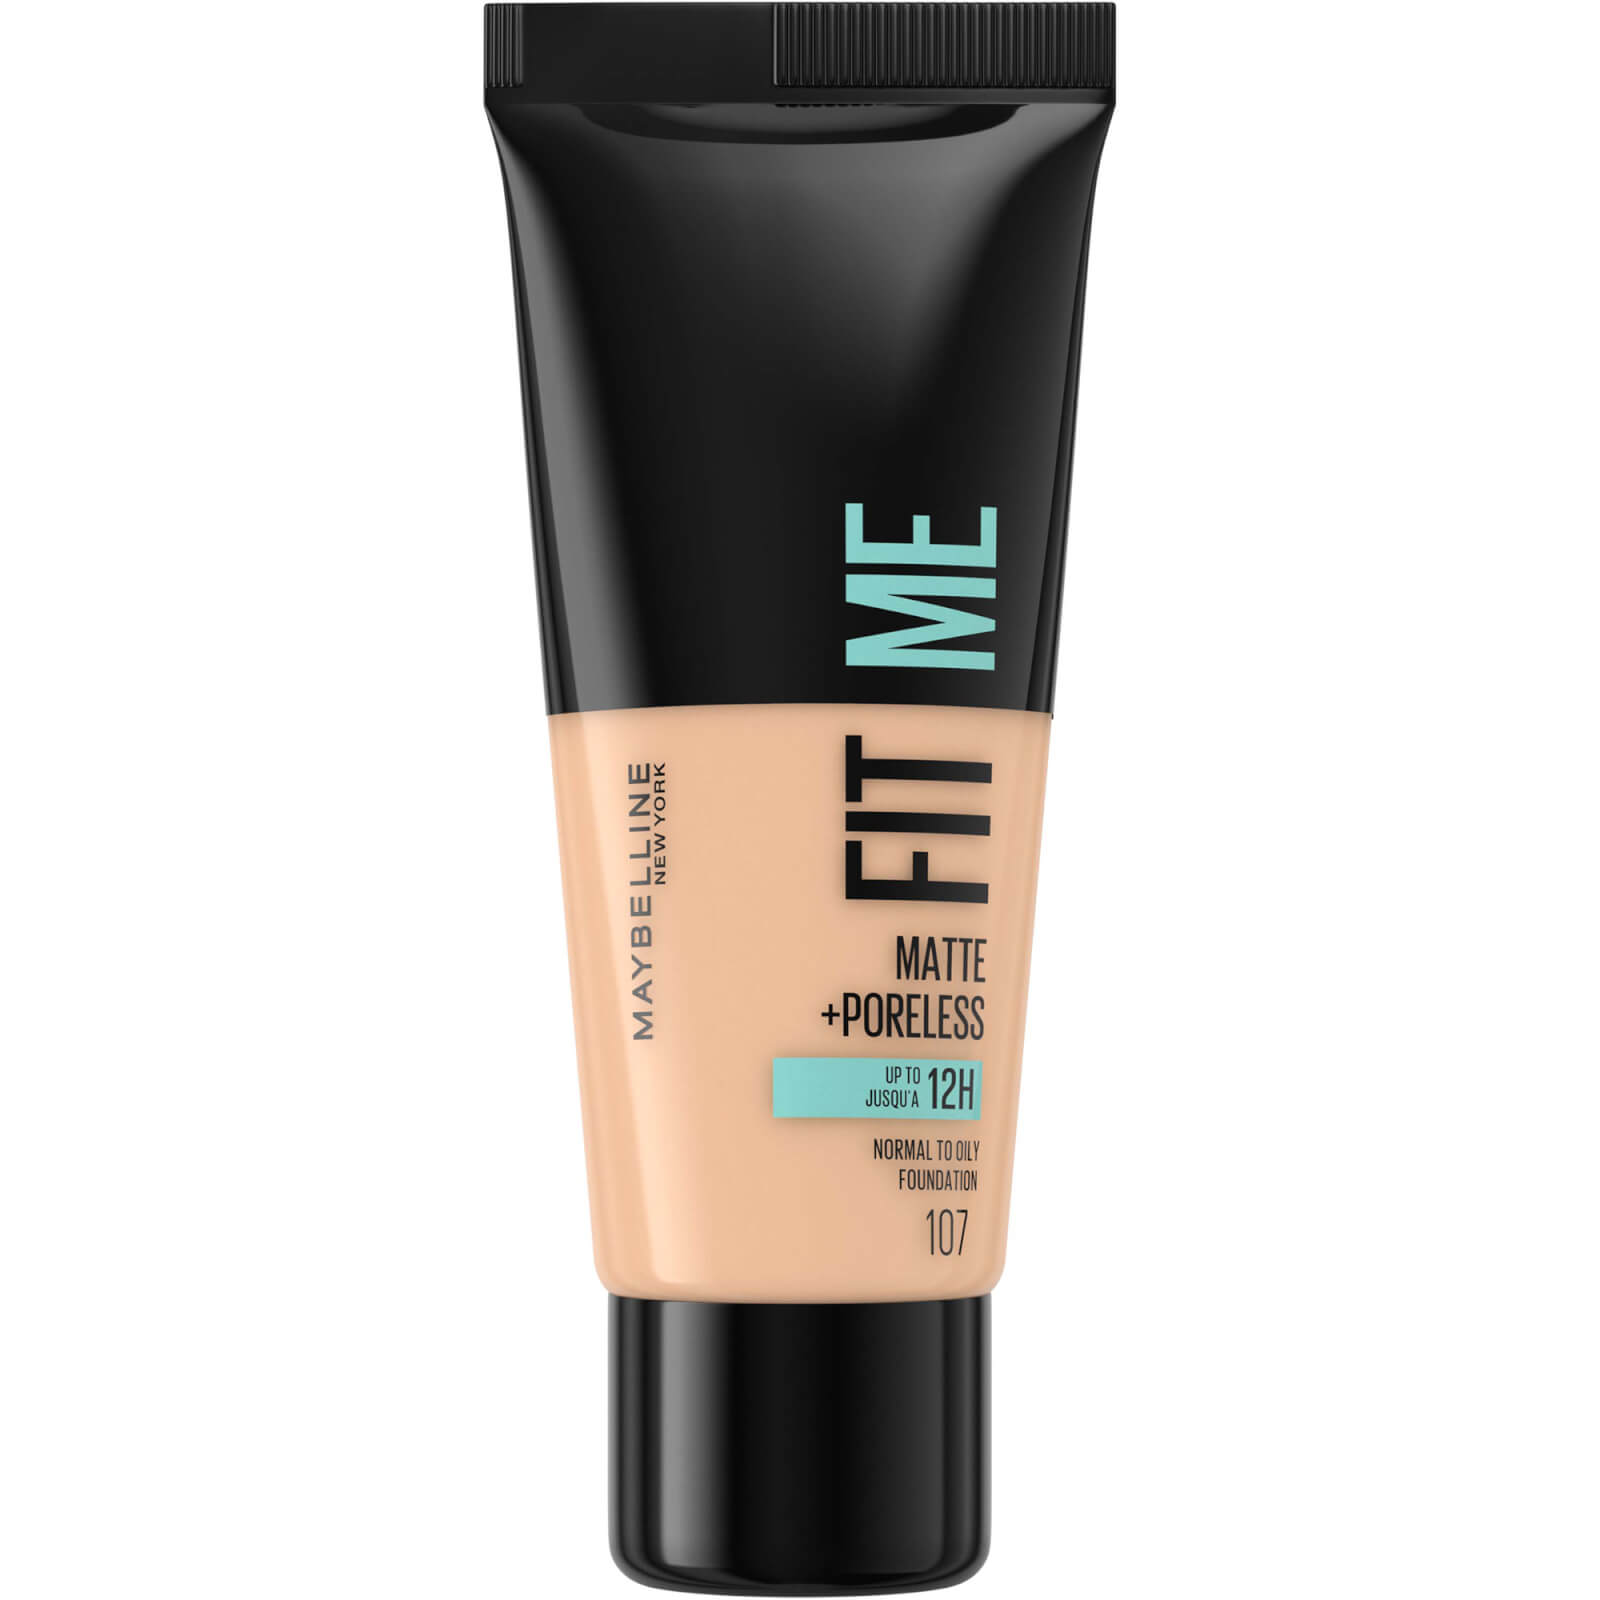 Maybelline Fit Me! Matte and Poreless Foundation 30ml (Various Shades) - 107 Rose Beige